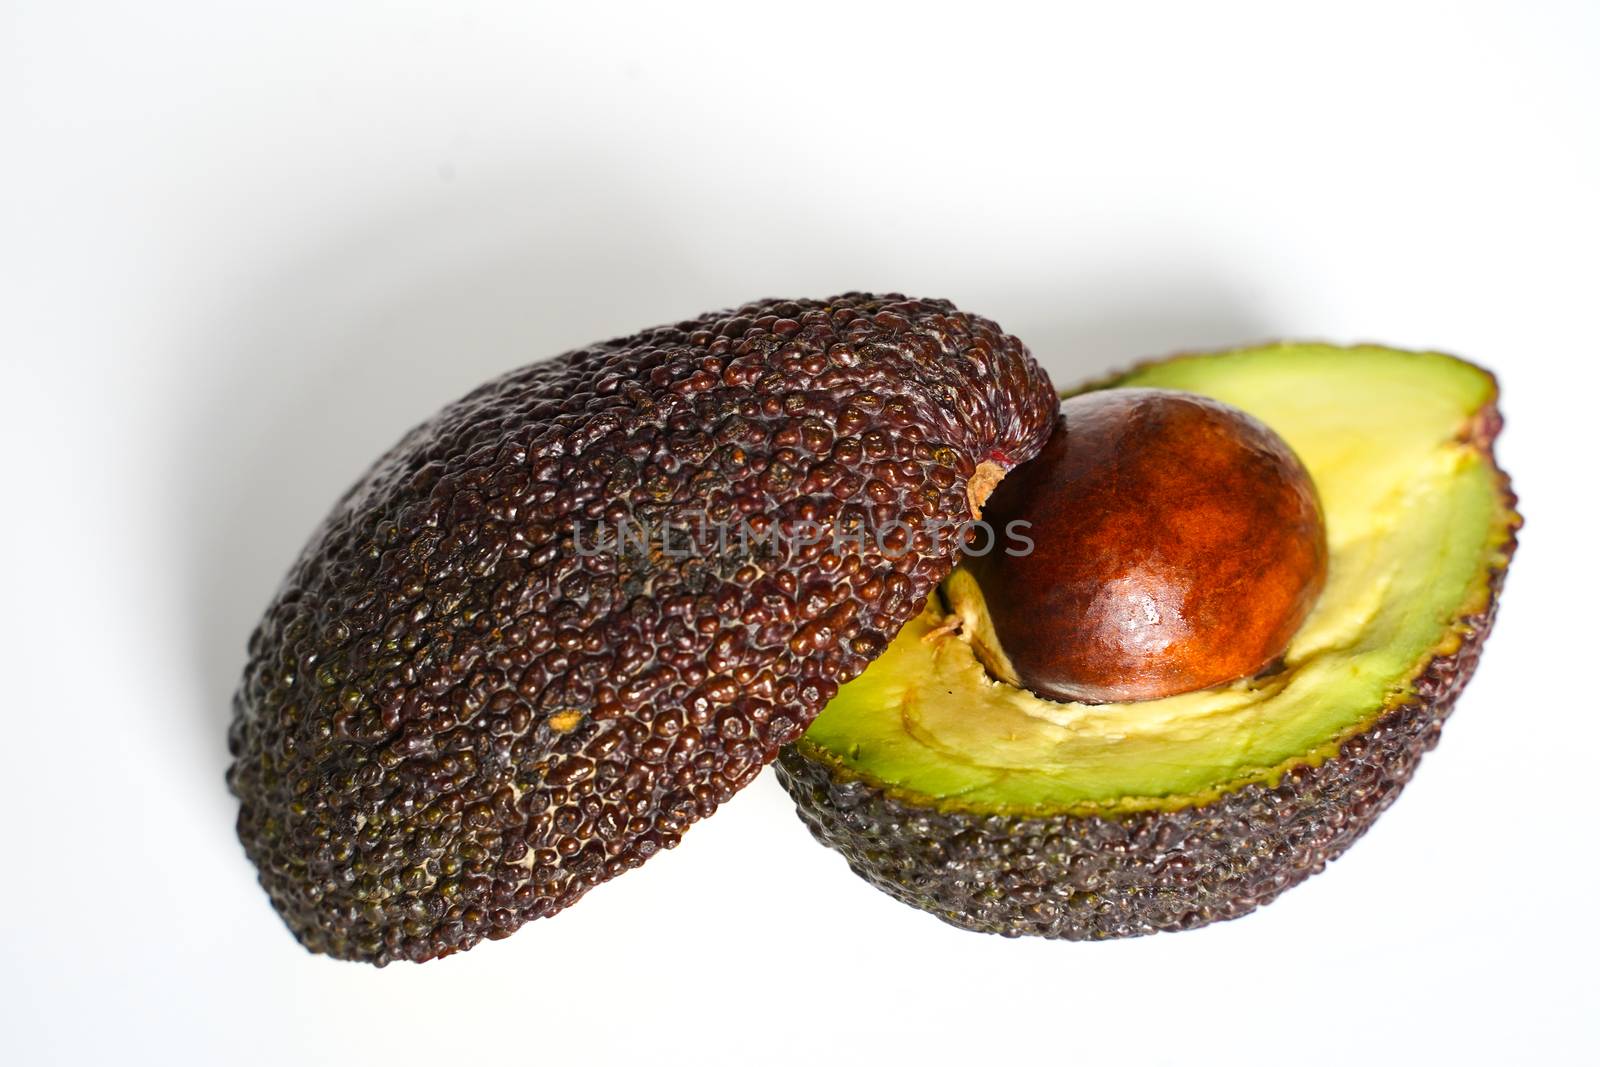 An avocado sliced in half to reveal the core against a plain whit background